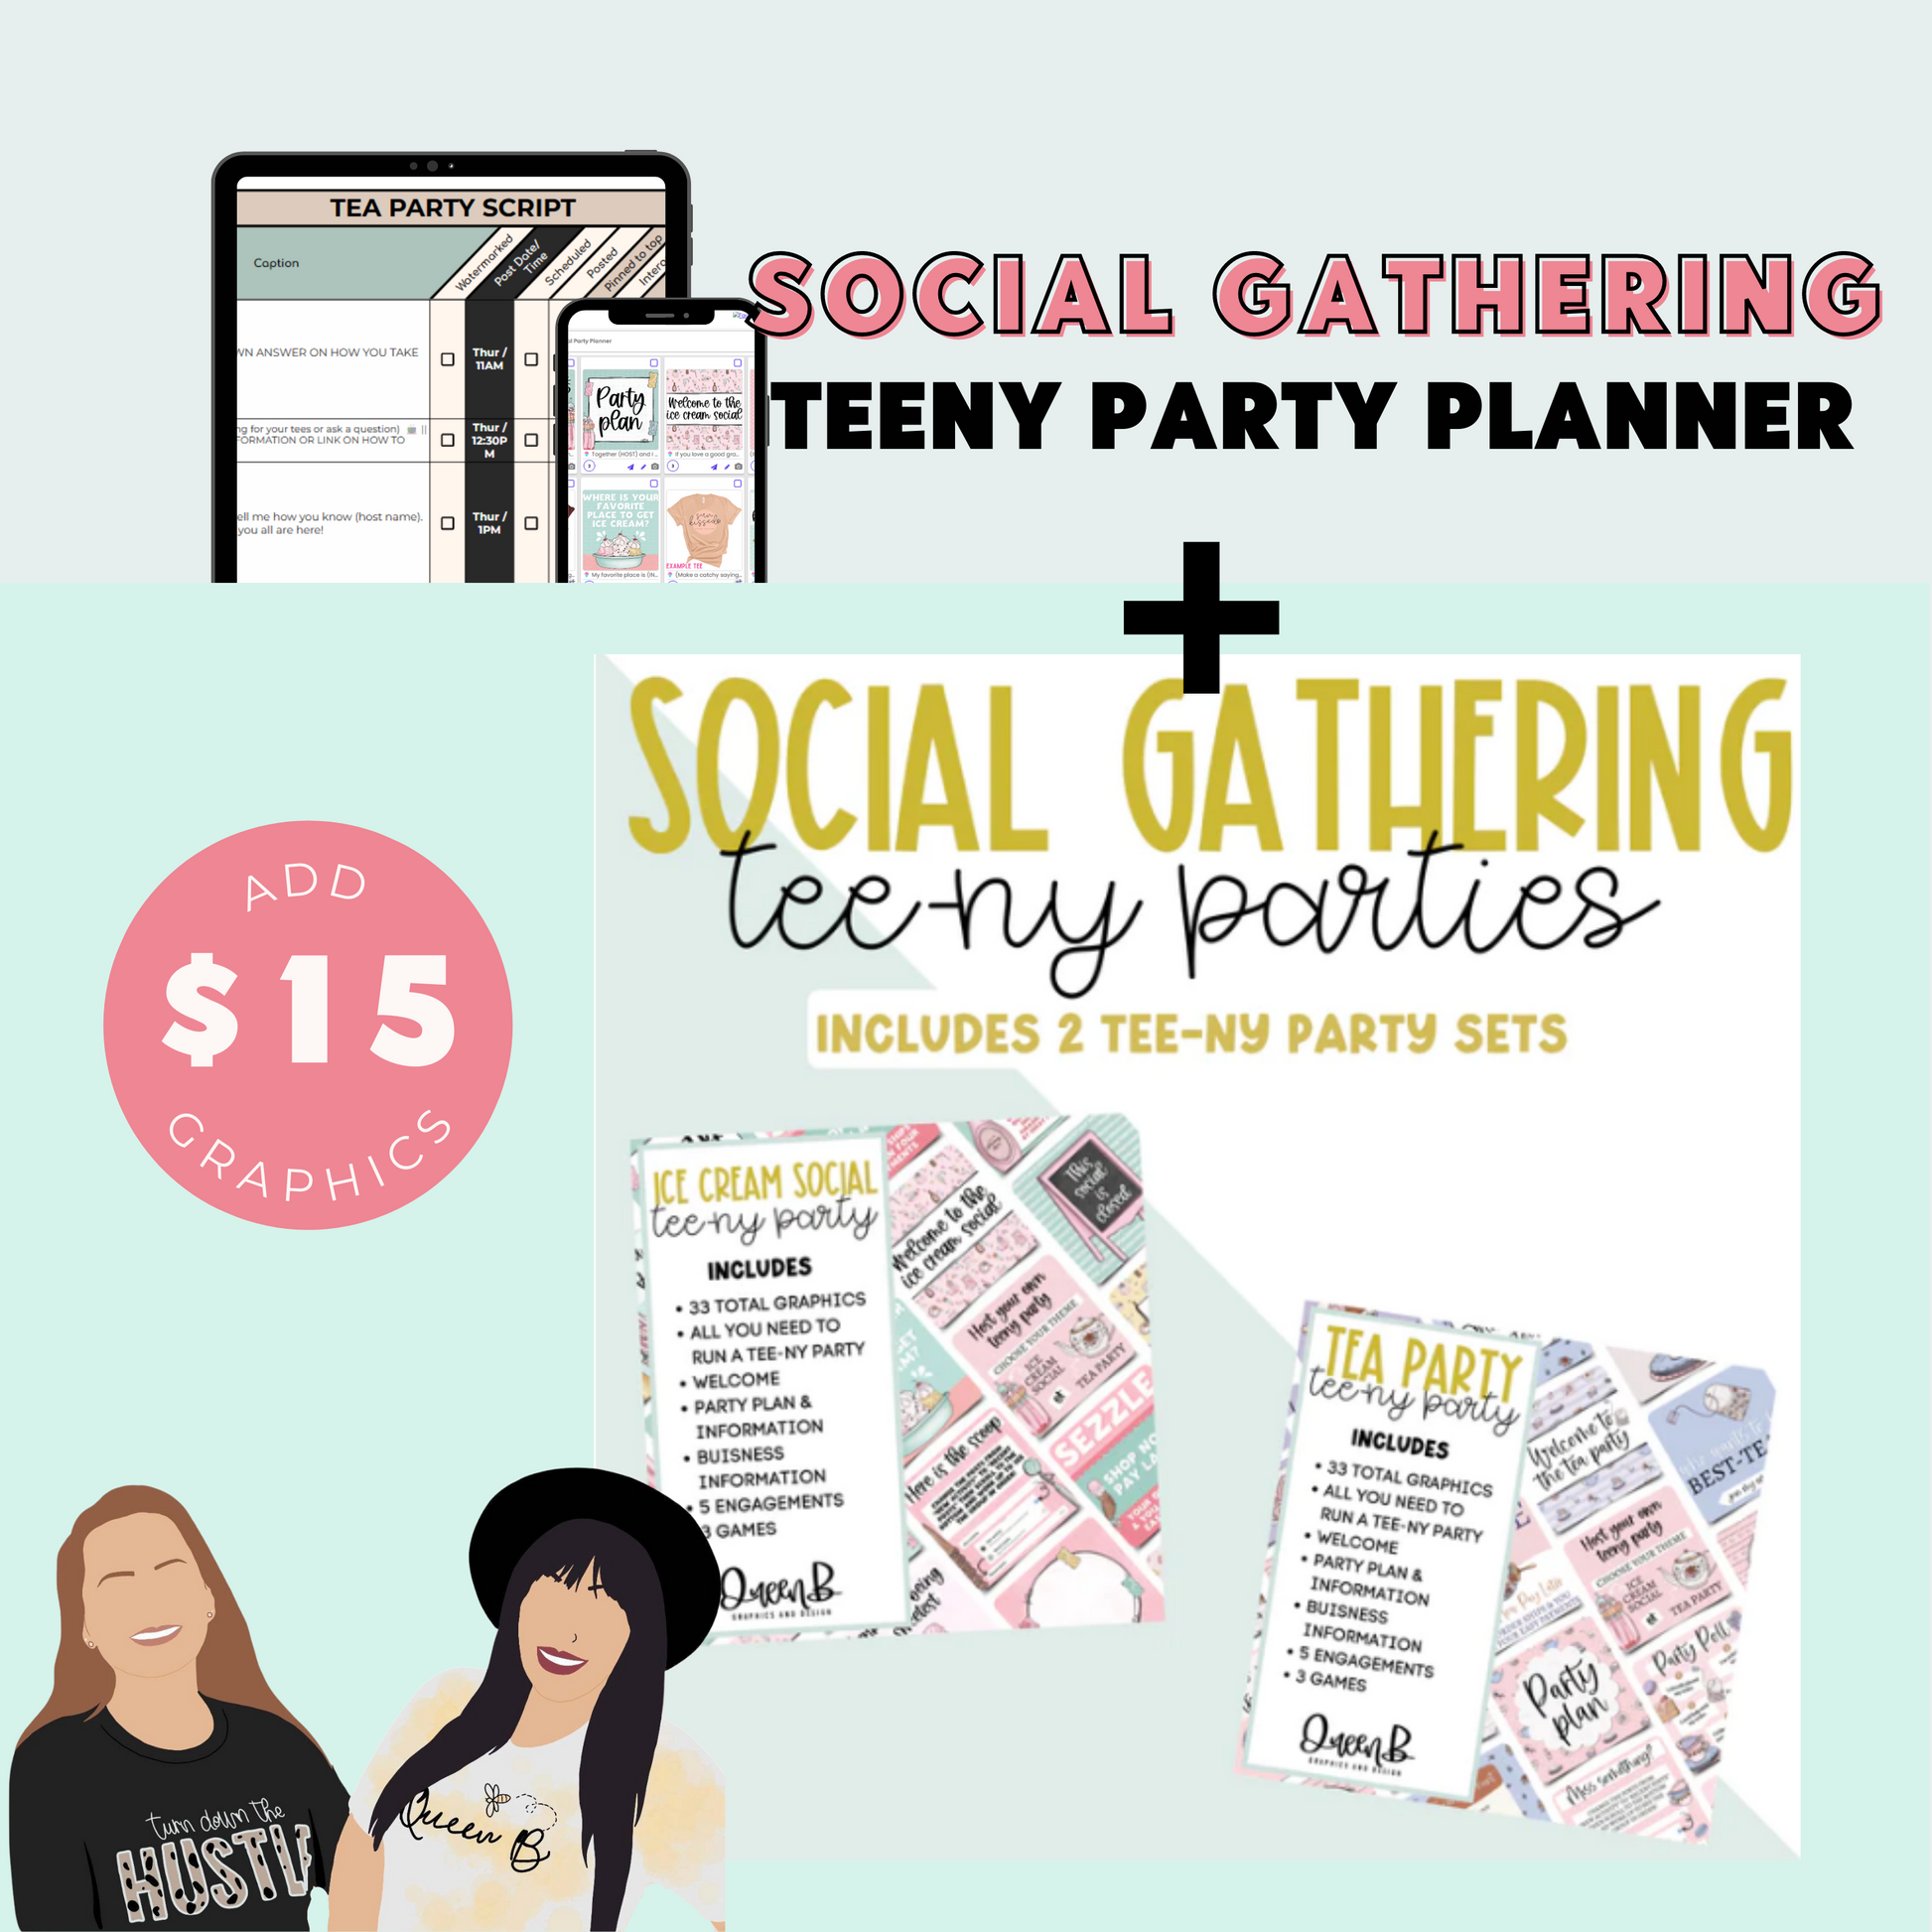 Social Gathering Teeny Party Planner | Sun Kissed Virtual Assistant